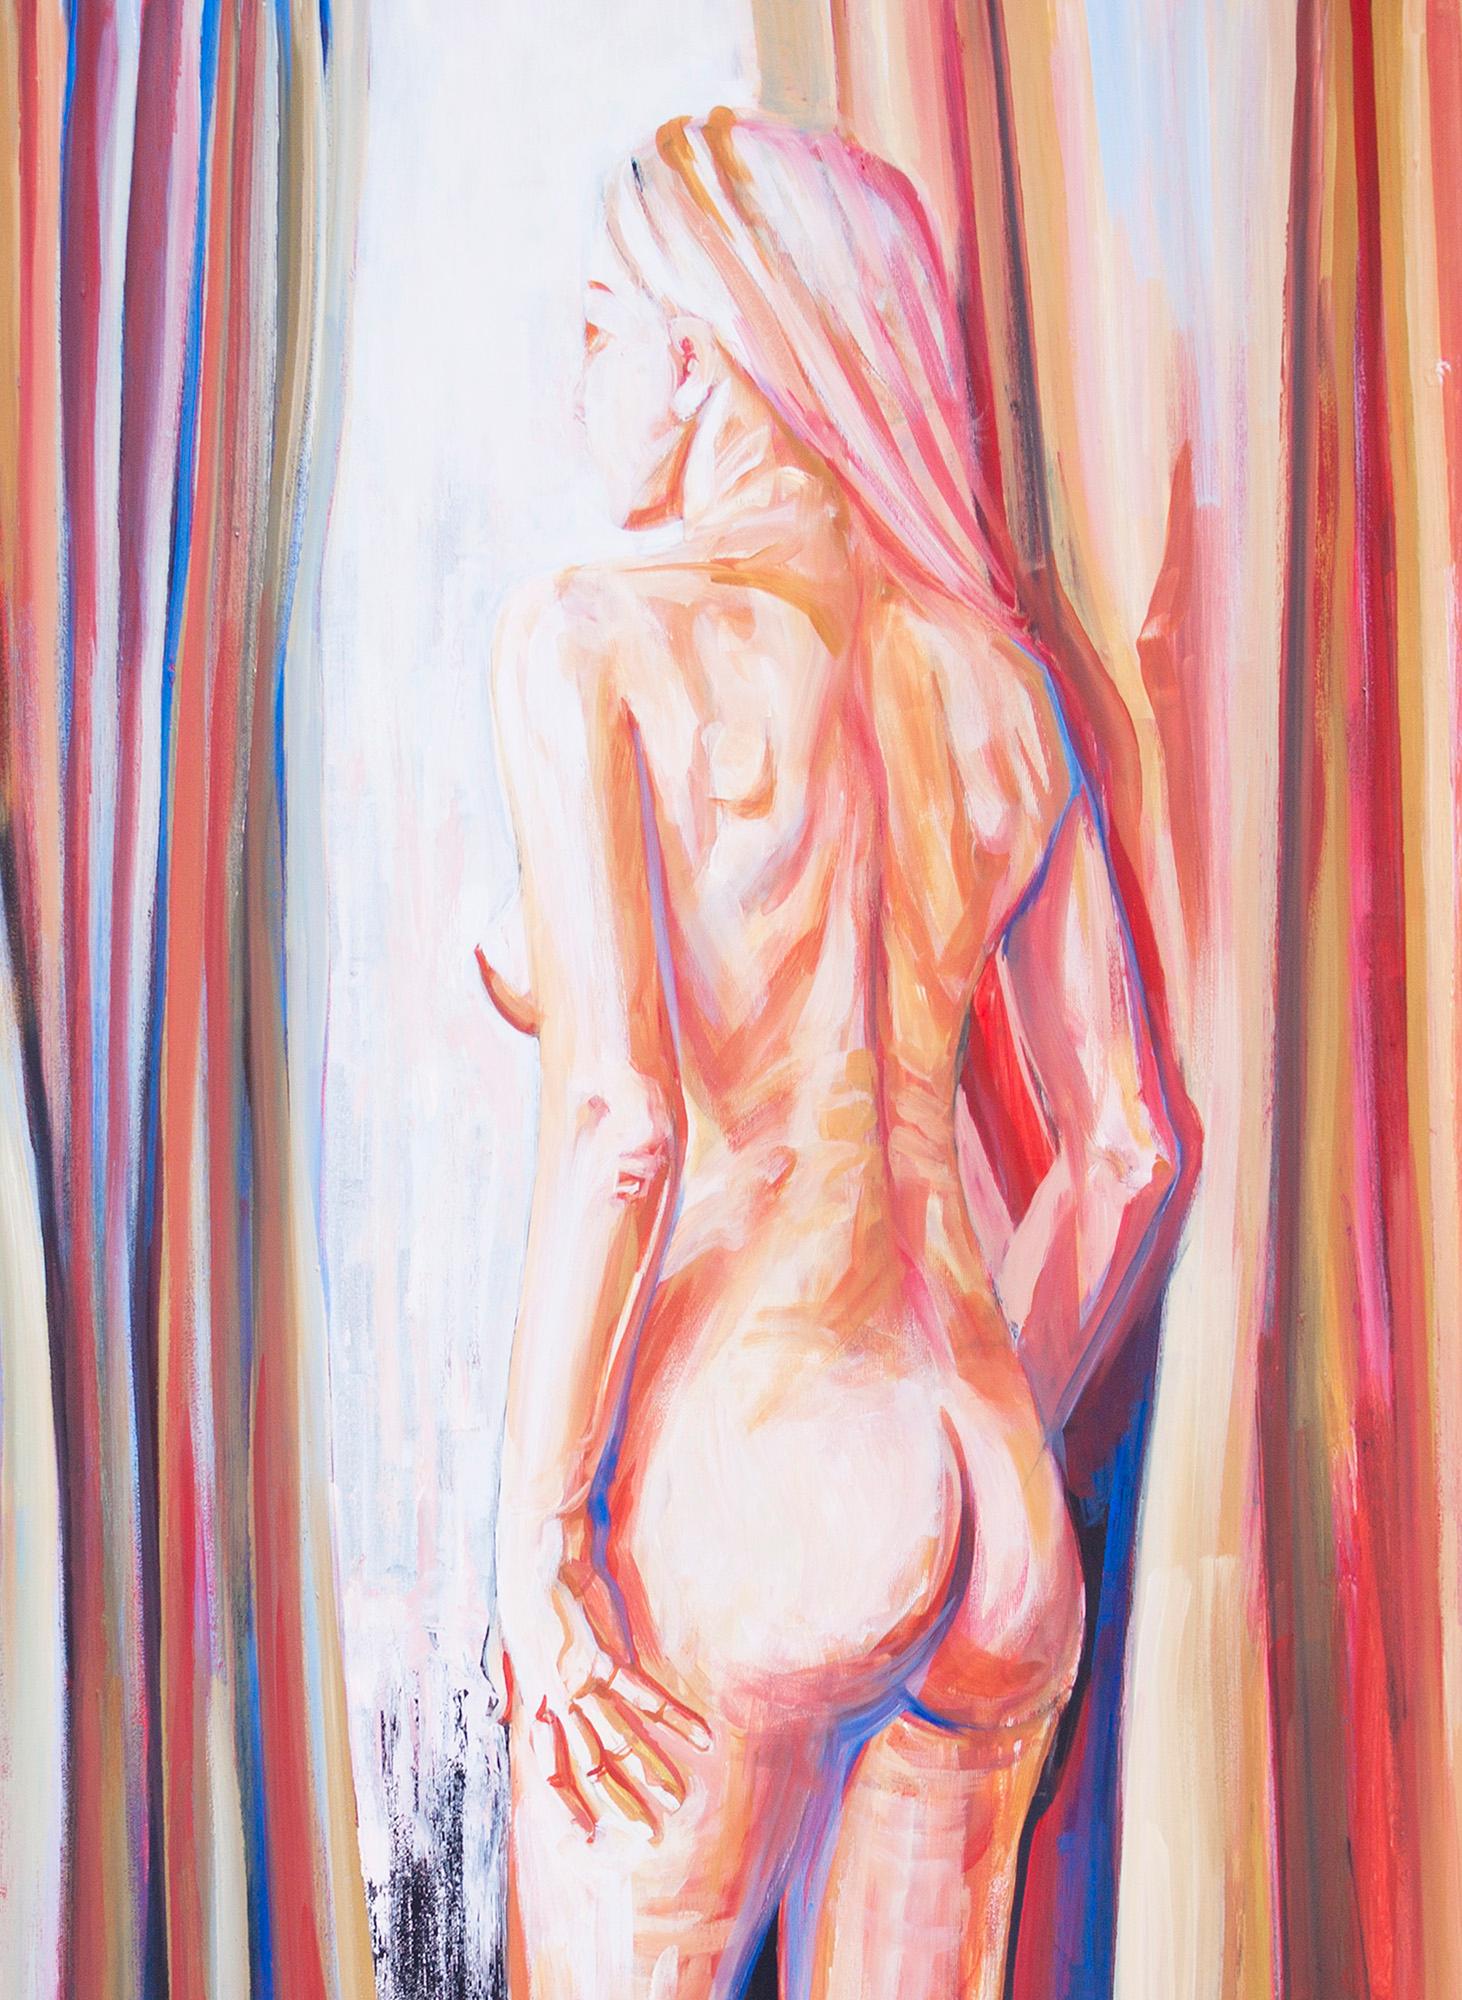 Nude Standing by the Window - Painting by Paula Craioveanu